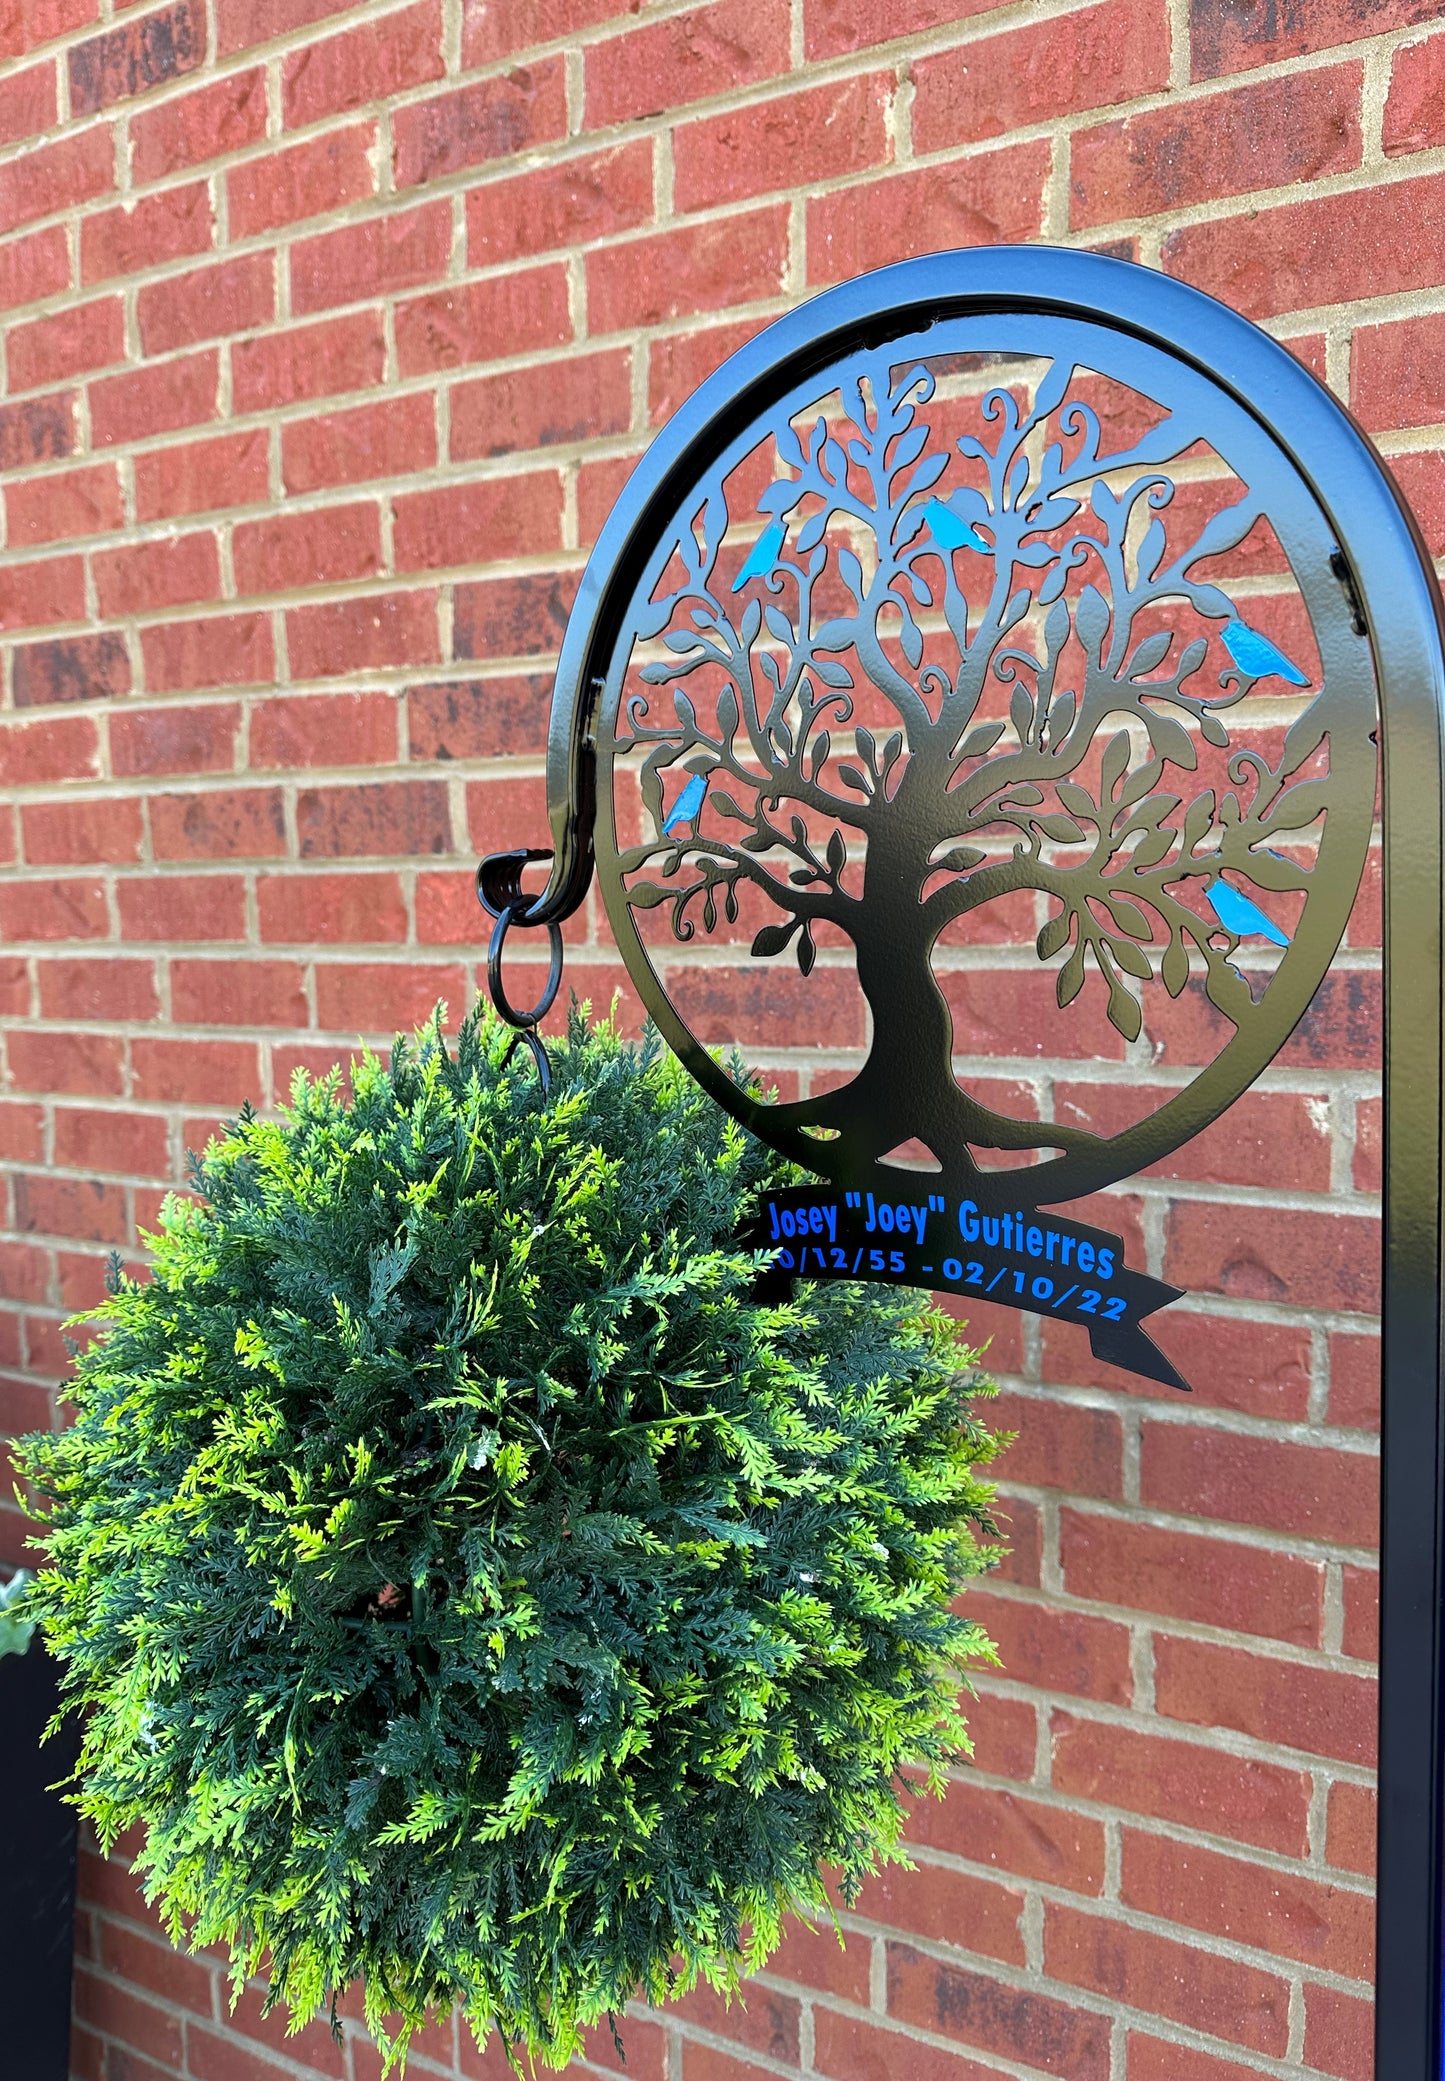 Tree of life Shepherd Hook with Banner and Blue Birds